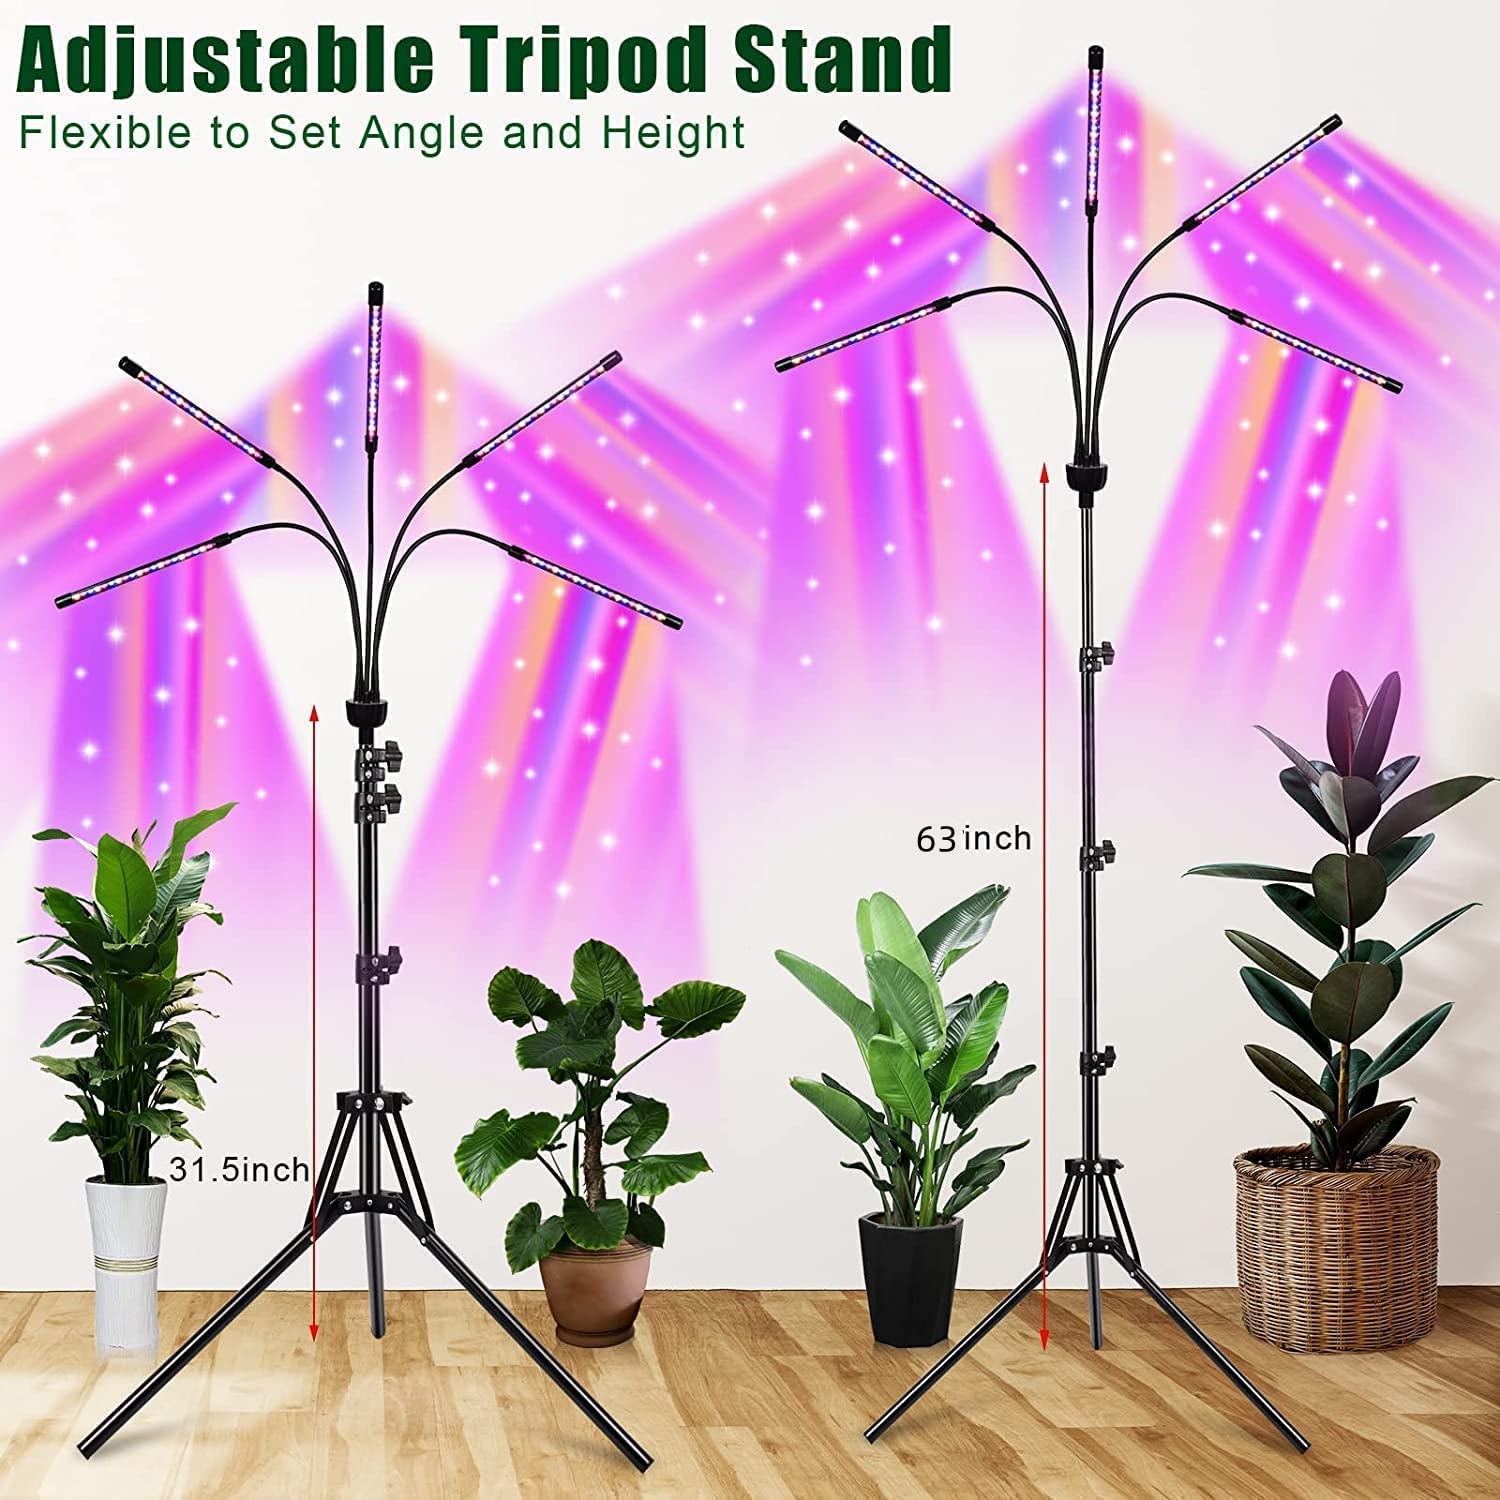 Grow Lights for Indoor Plants,5 Heads Red Blue White Full Spectrum Plant Light with 15-60" Adjustable Tripod Stand, Indoor Grow Lamp with Remote Control and Auto On/Off Timer Function